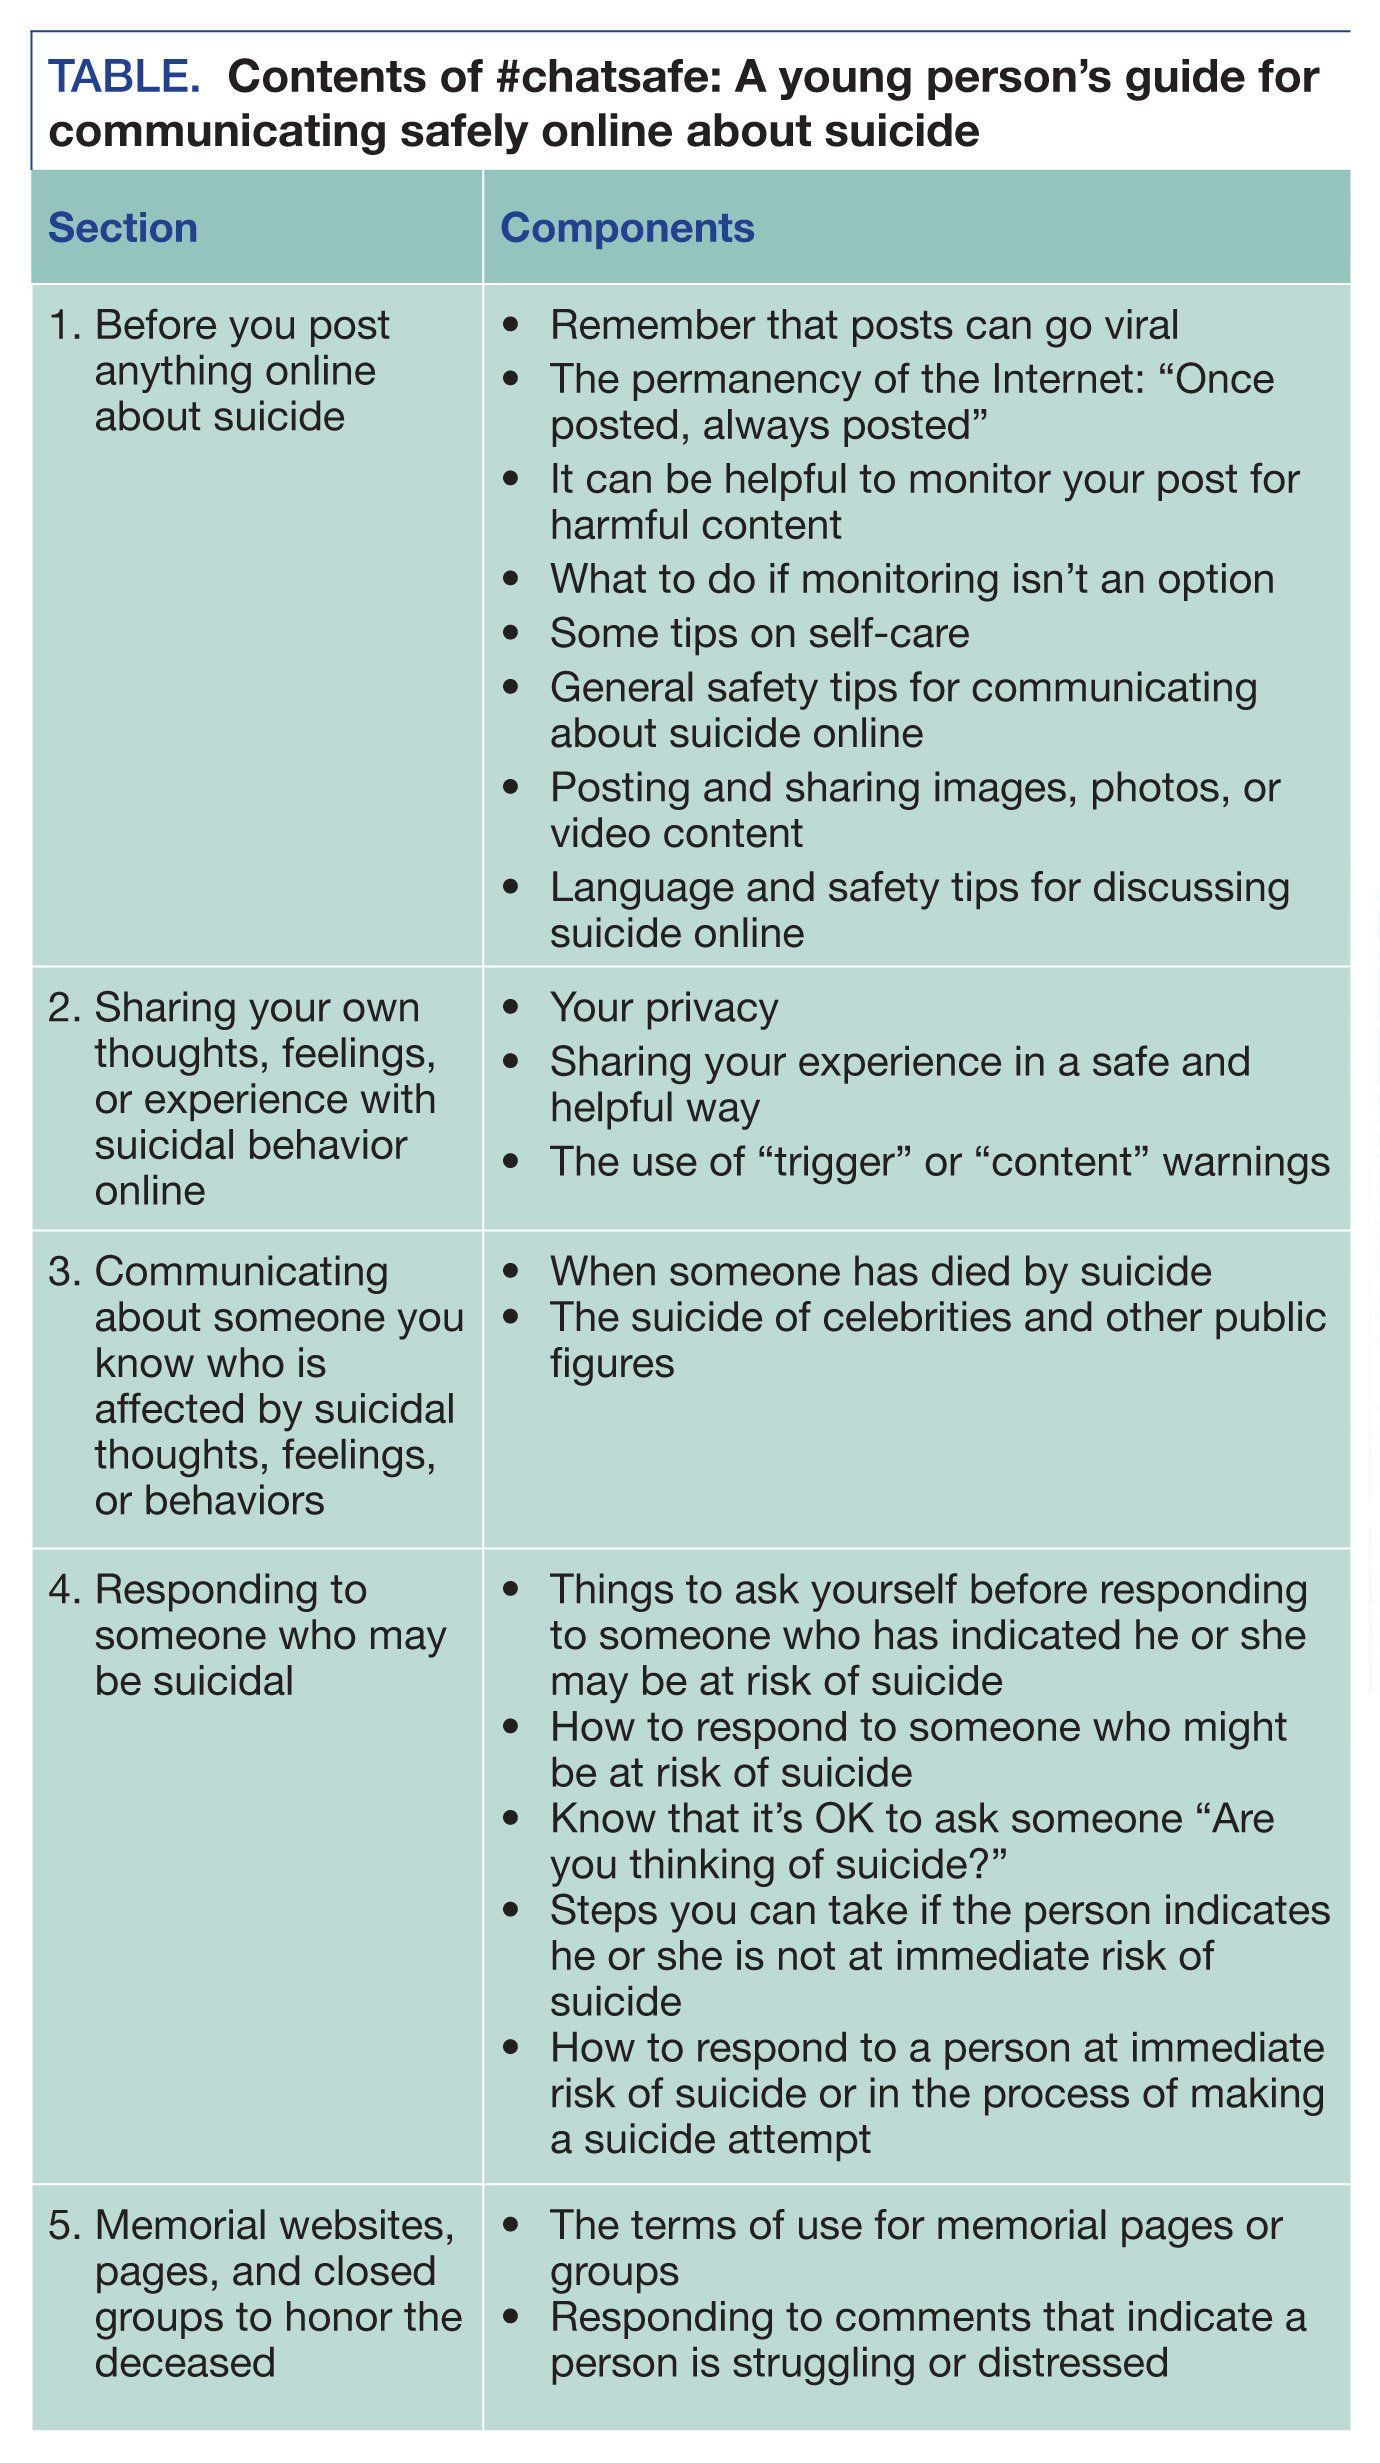 Contents of #chatsafe: A young person’s guide for communicating safely online about suicide